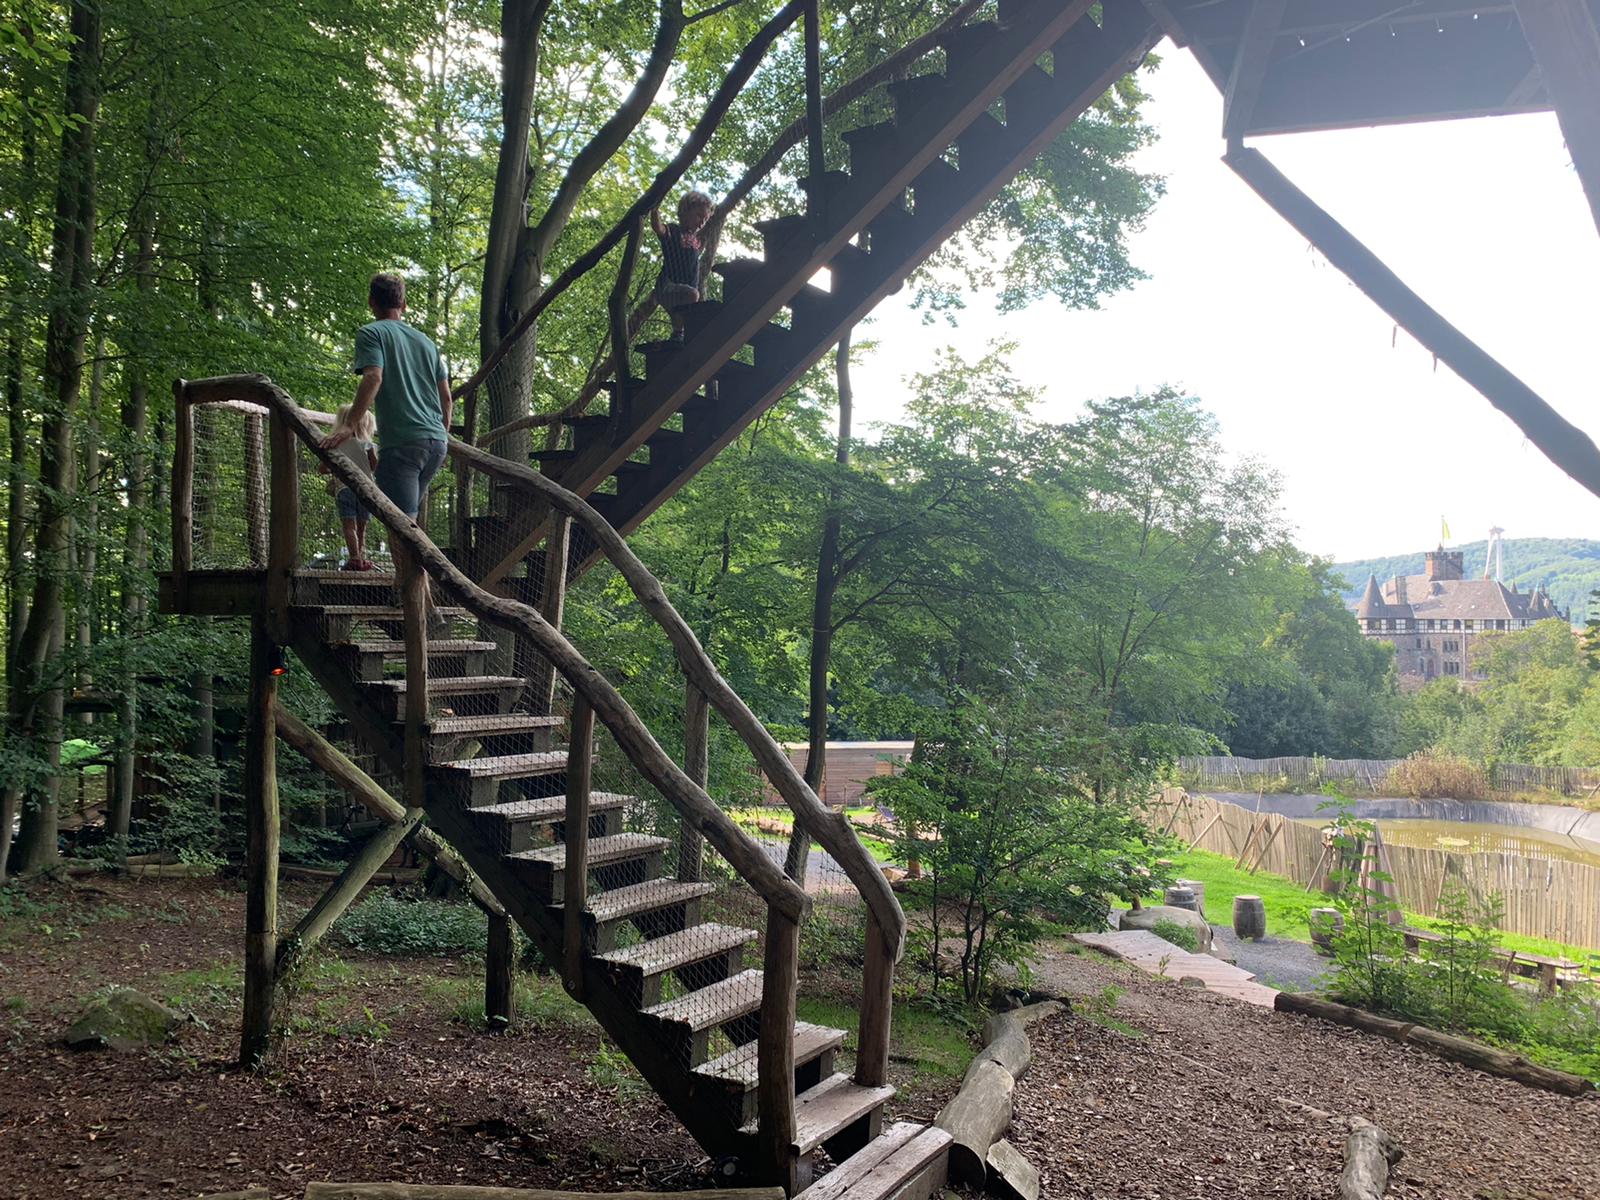 Climbing up to a treehouse at the German Treehouses